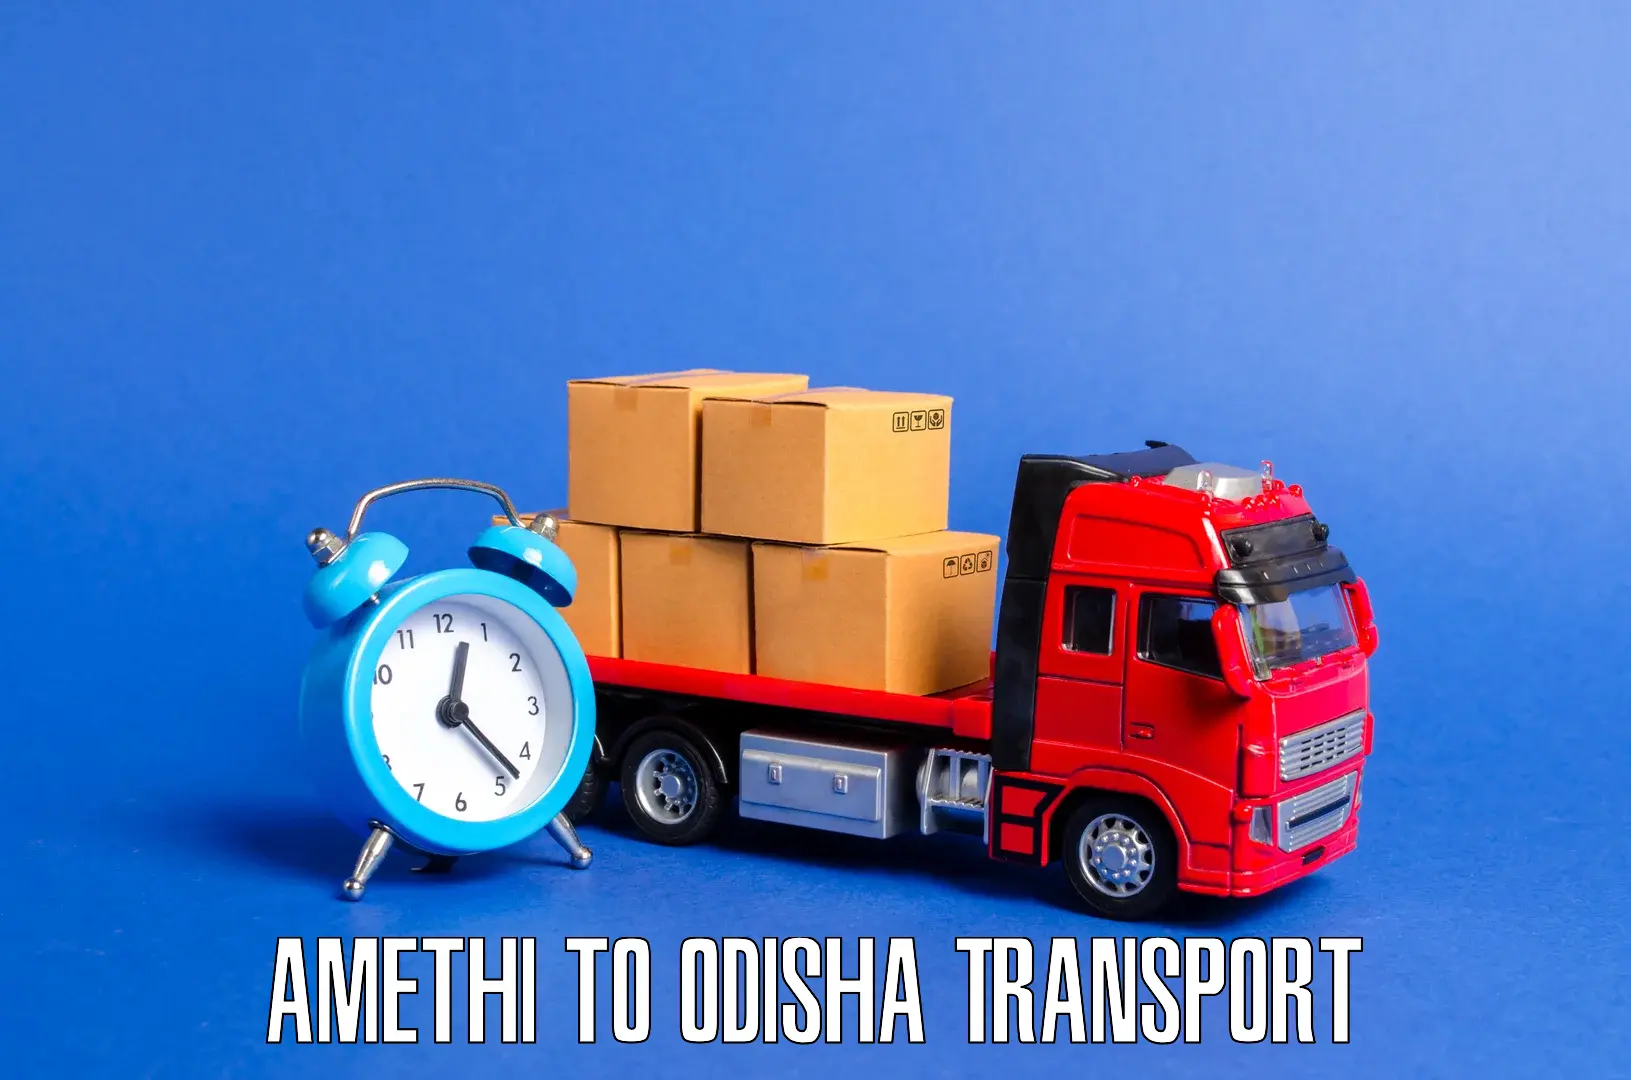 Transport bike from one state to another Amethi to Odisha